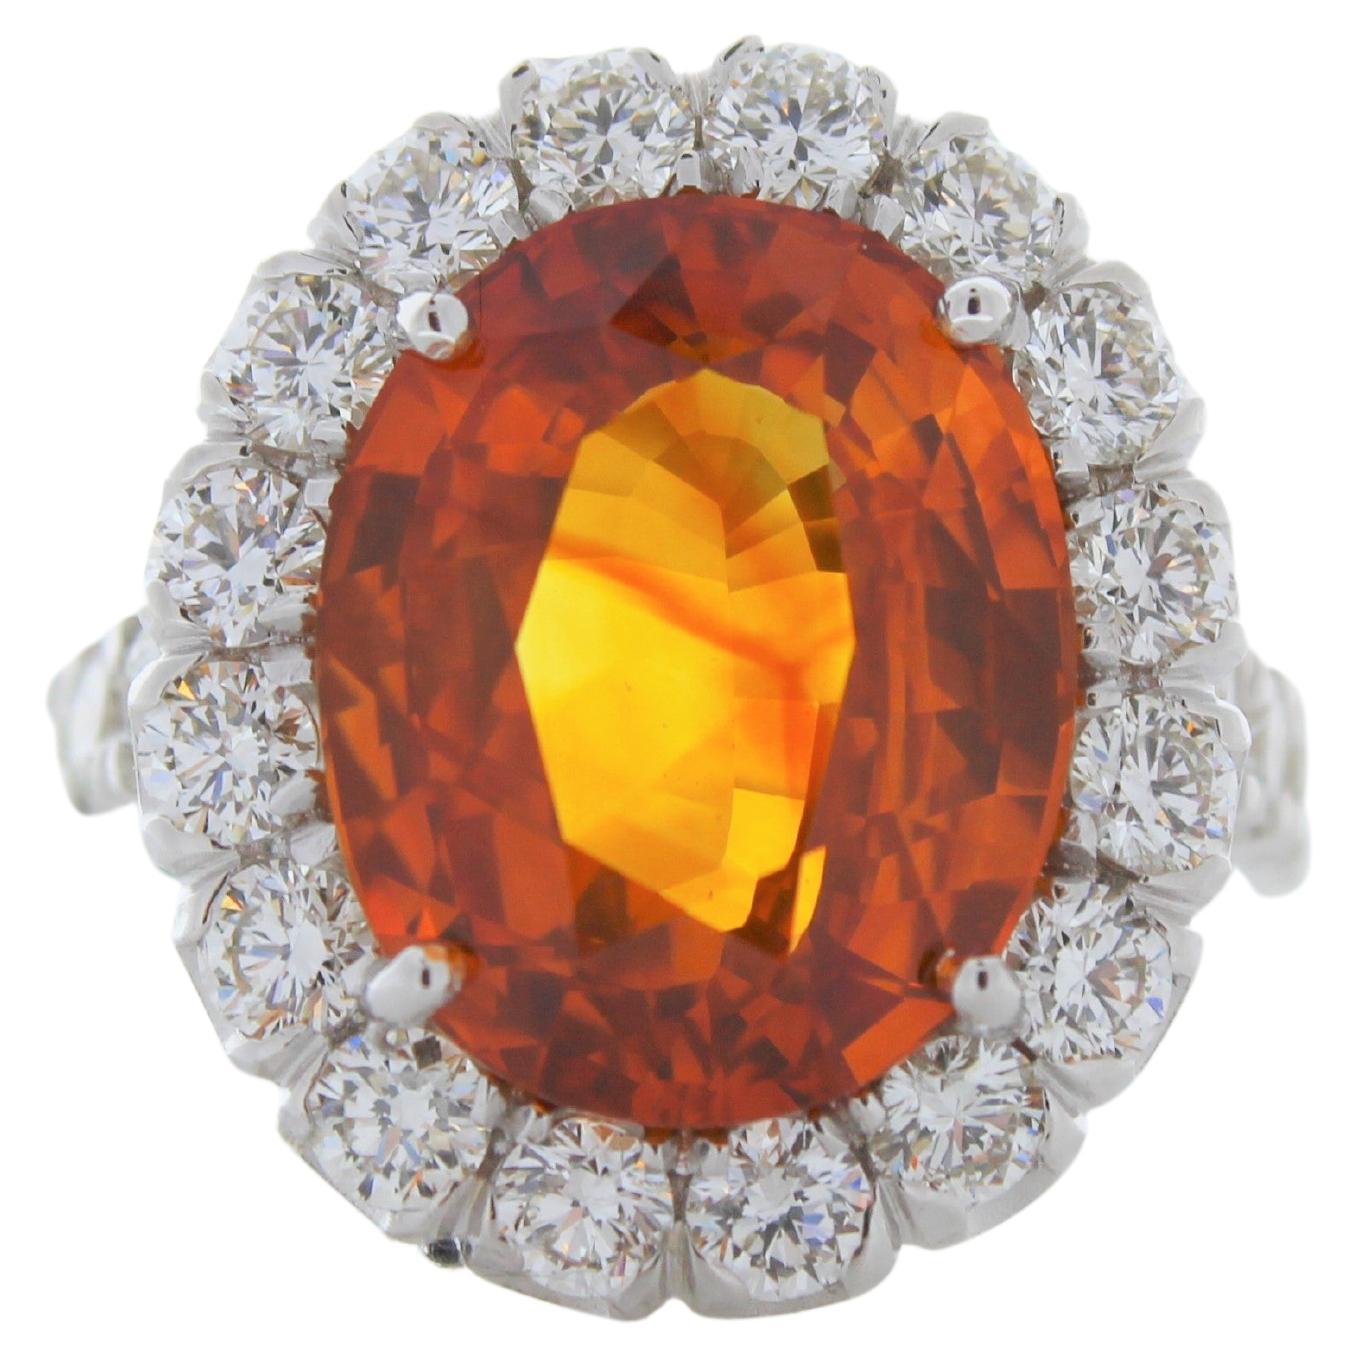 10.47 Carat Oval Orange Sapphire and Diamond Ring in 18K White Gold